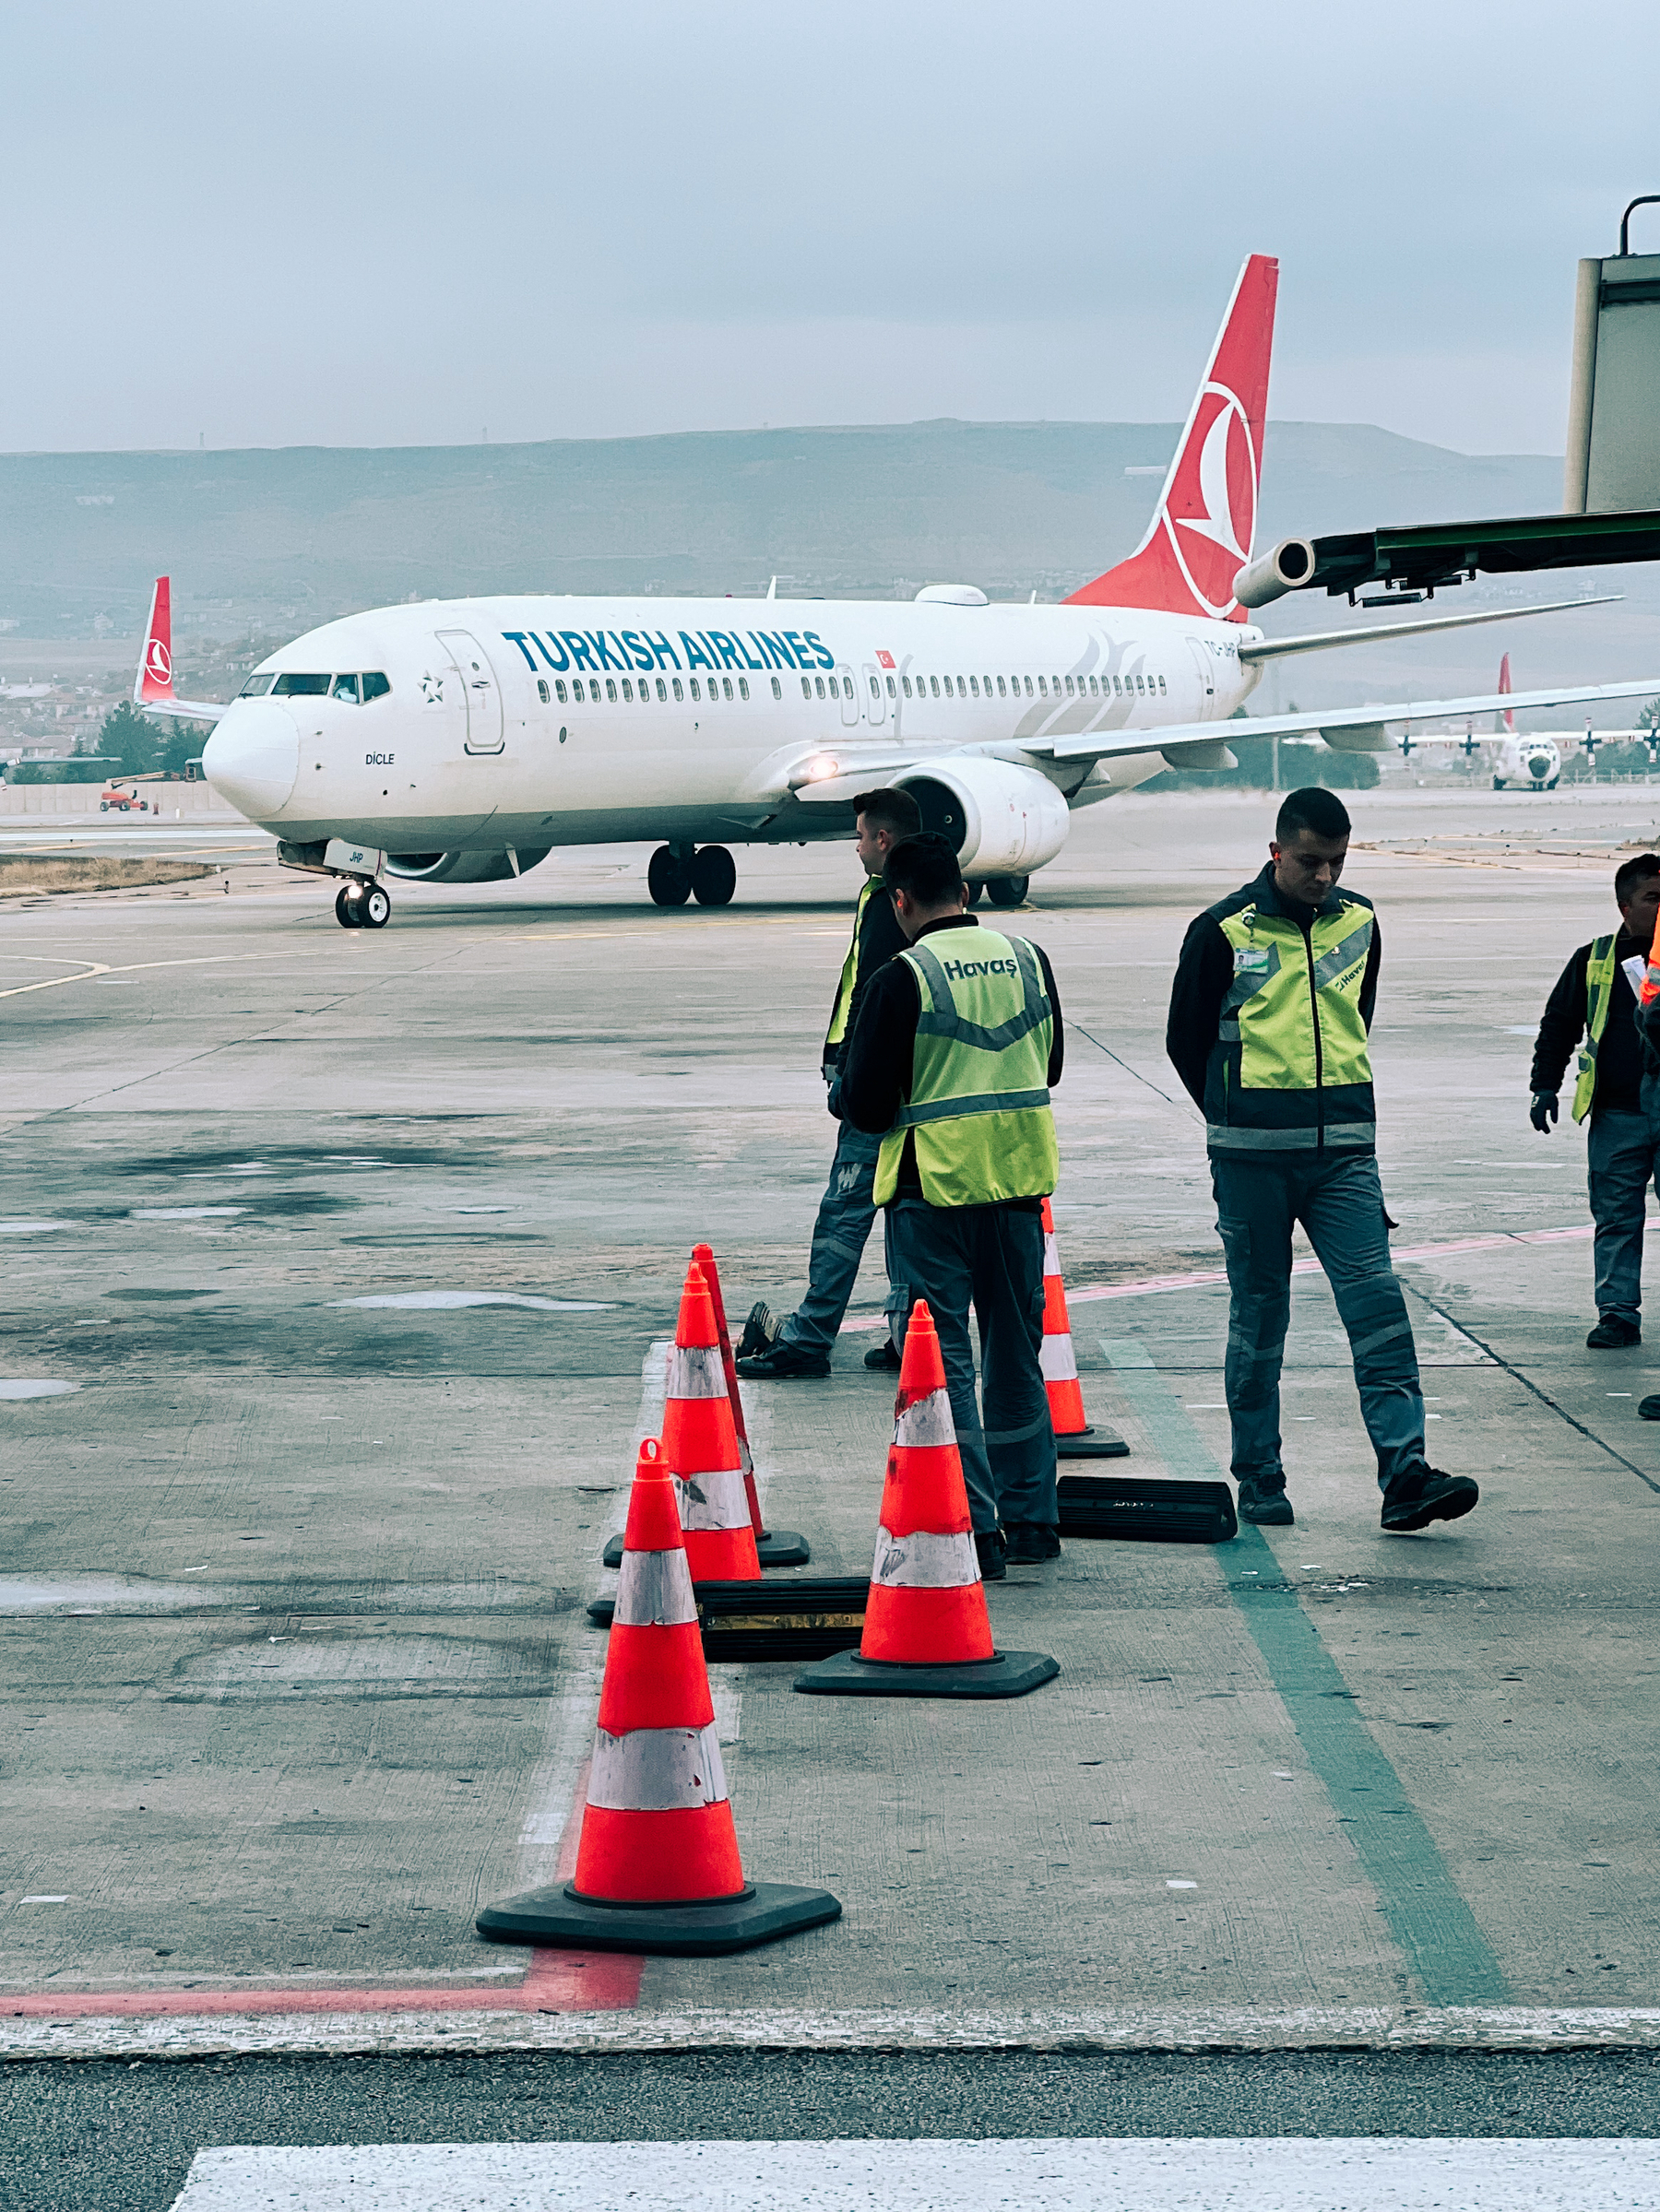 A Turkish Airlines airplane, and ground crew.